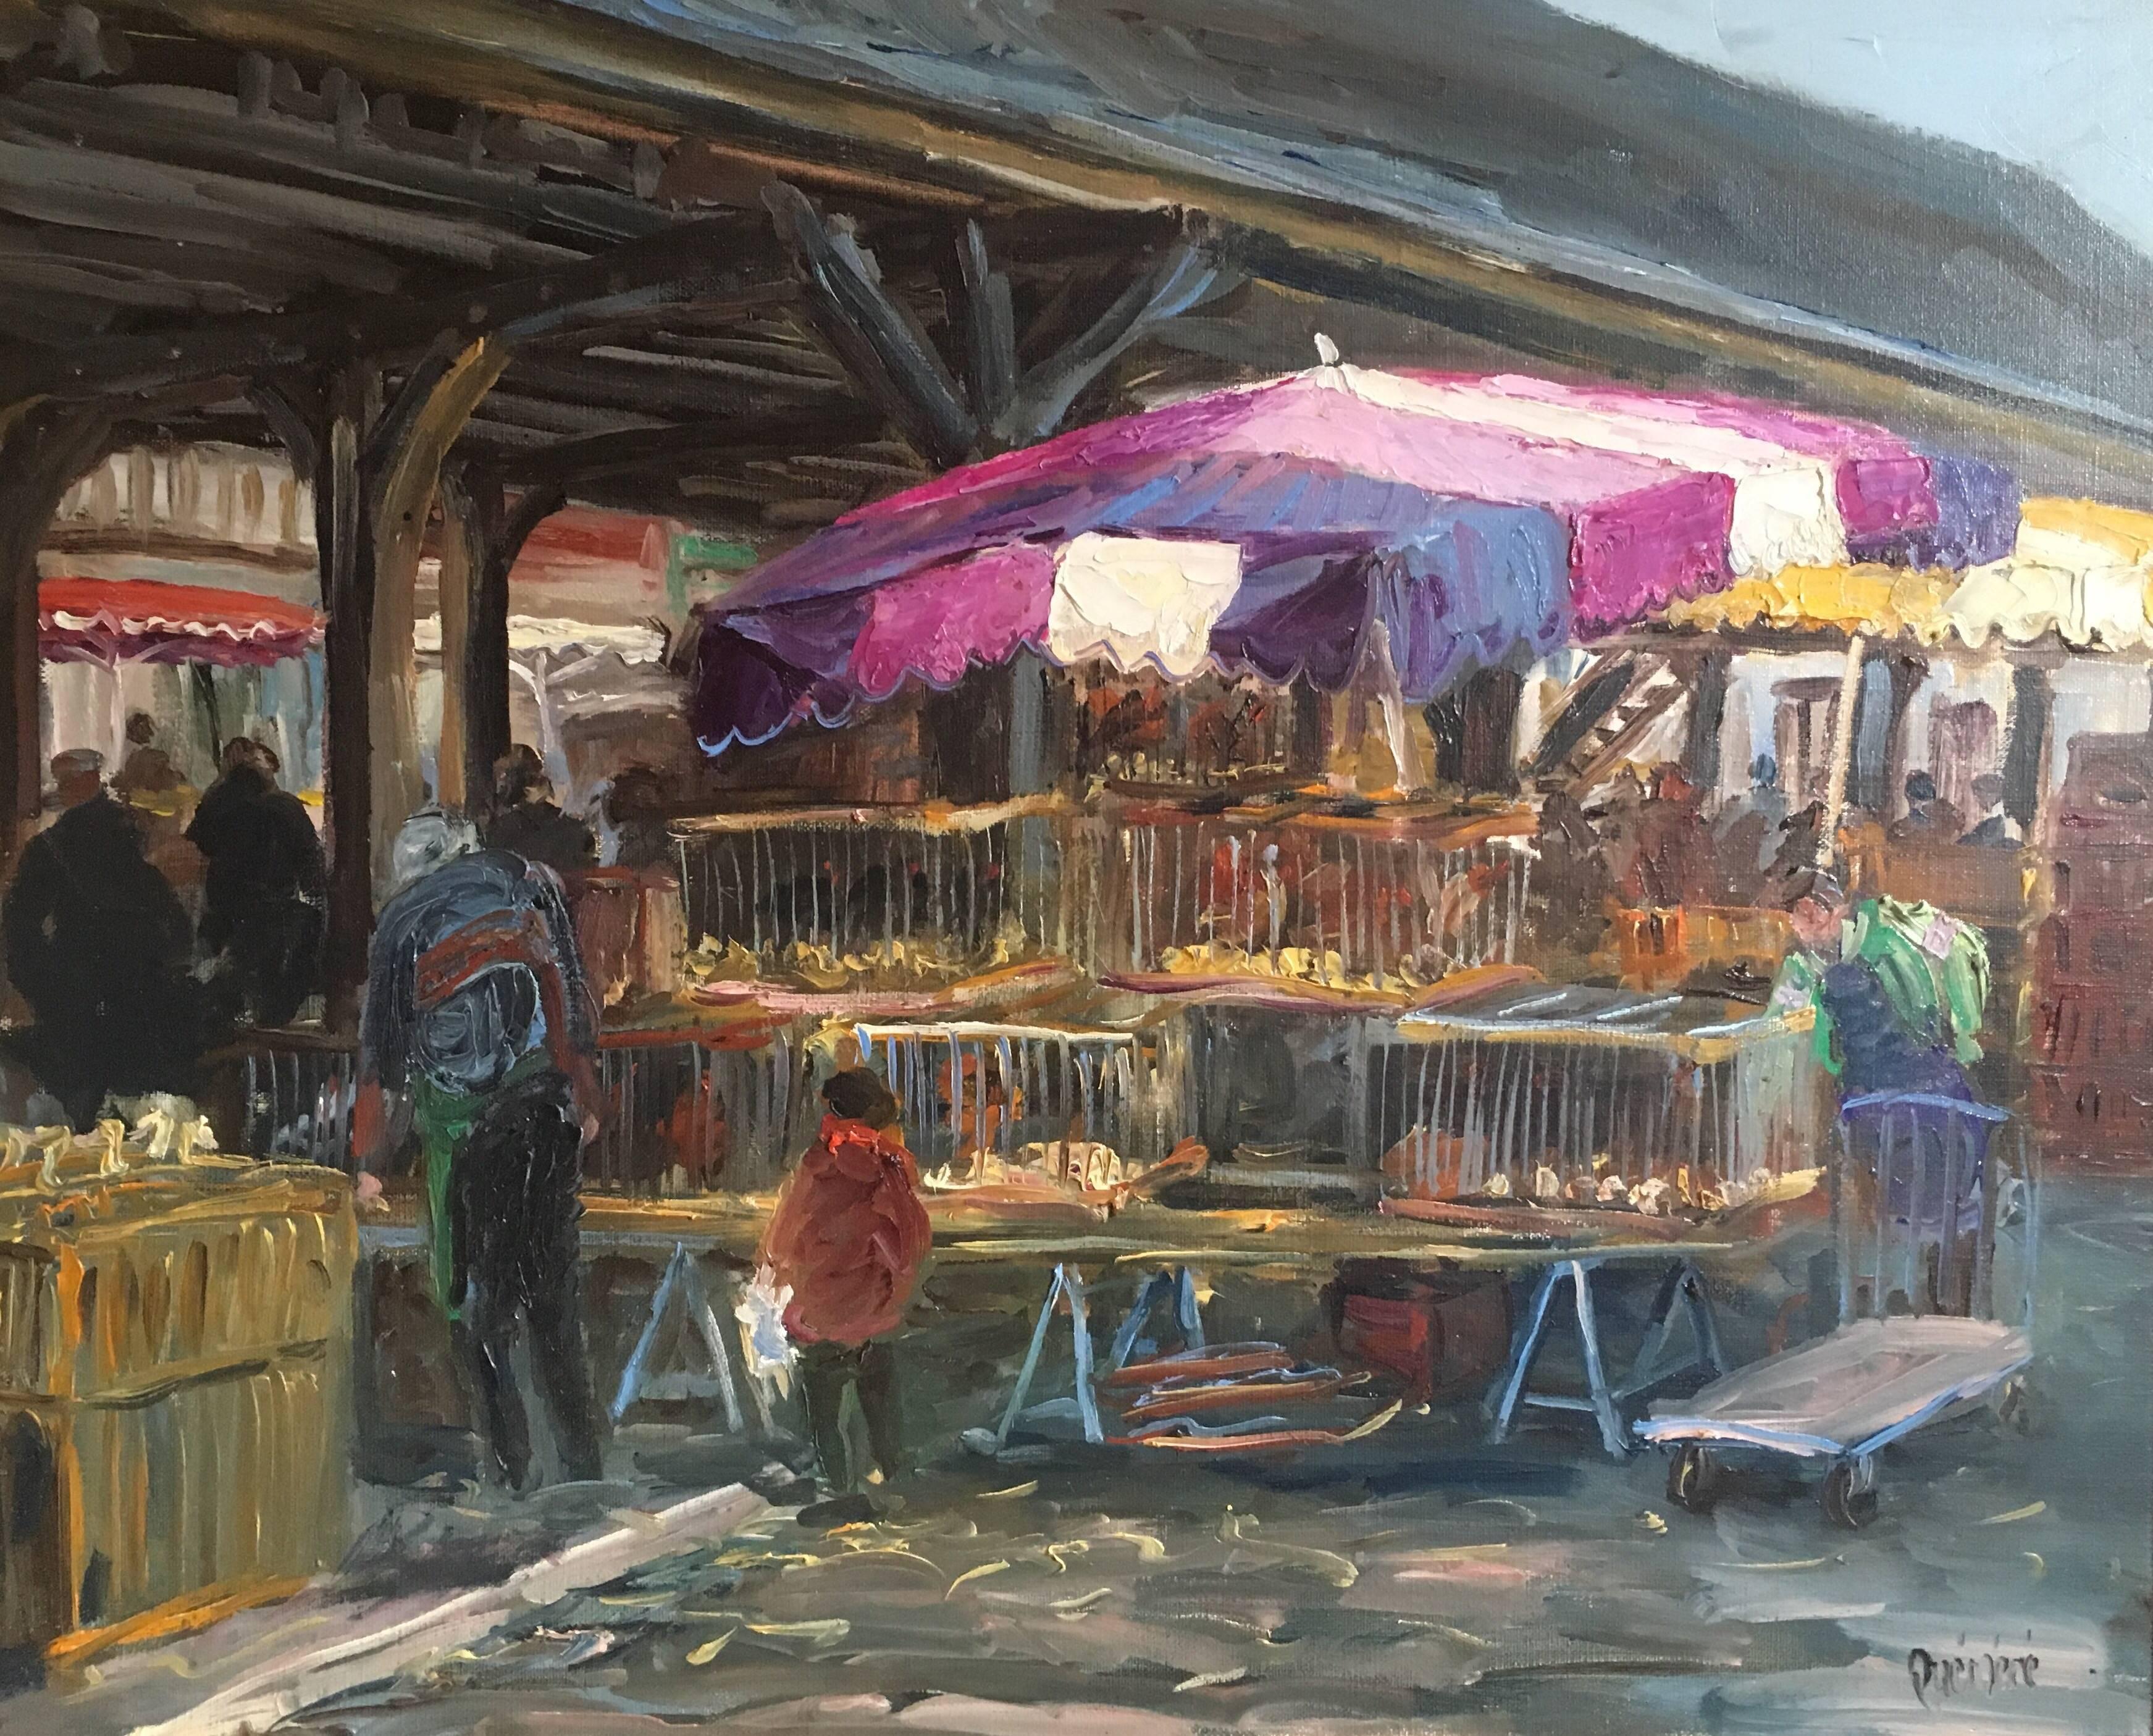 Unknown Figurative Painting - Le Marche de Bachy, French Market, Signed Oil Painting